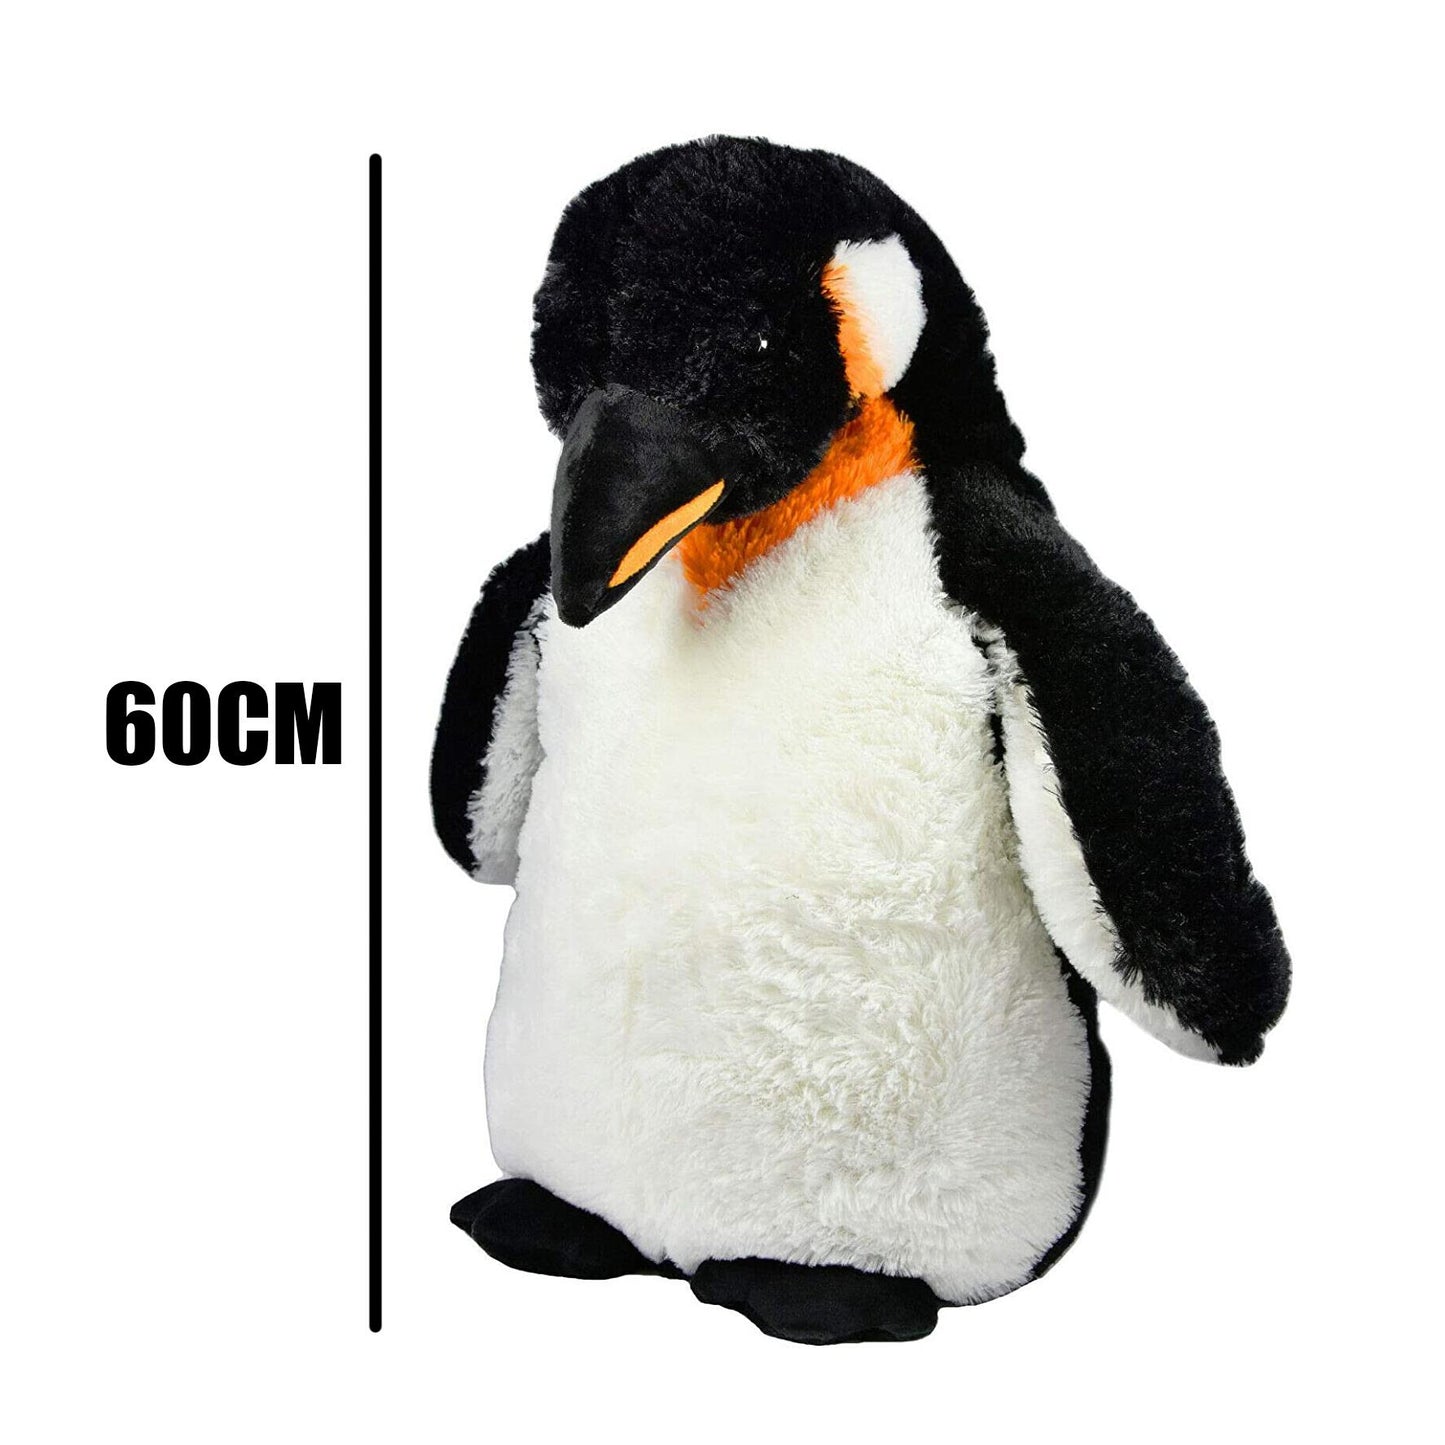 Giant Emperor Penguin Soft Toy by The Magic Toy Shop - UKBuyZone